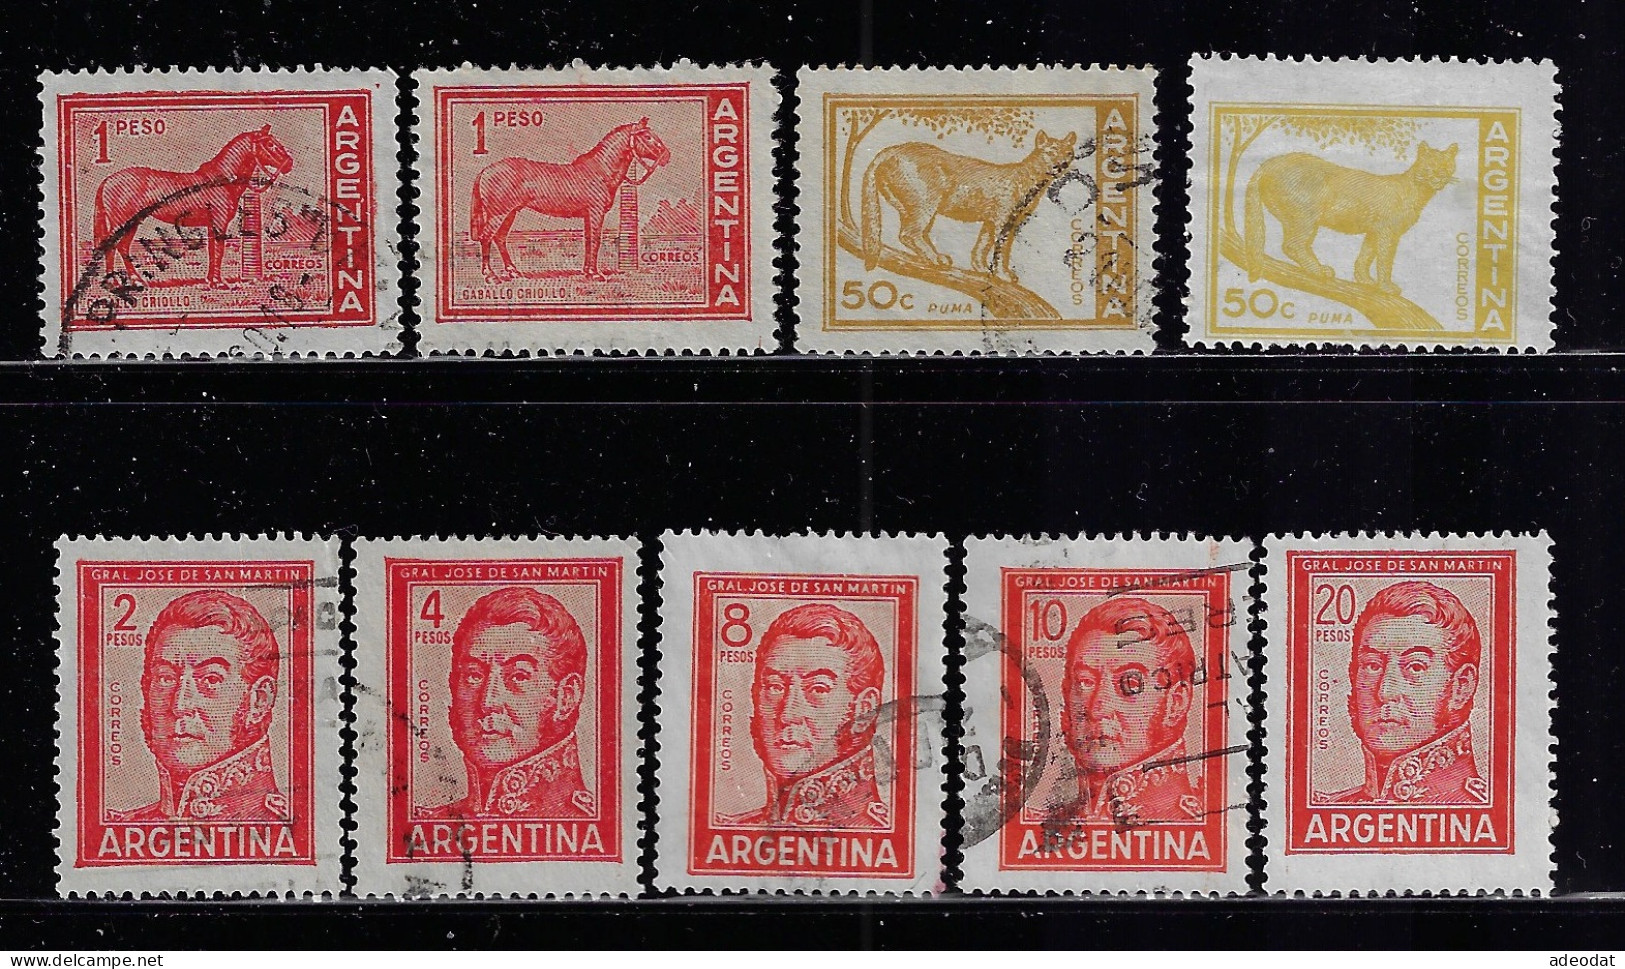 ARGENTINA  1959  SCOTT #687,689,691,694,695B,695D  USED - Used Stamps